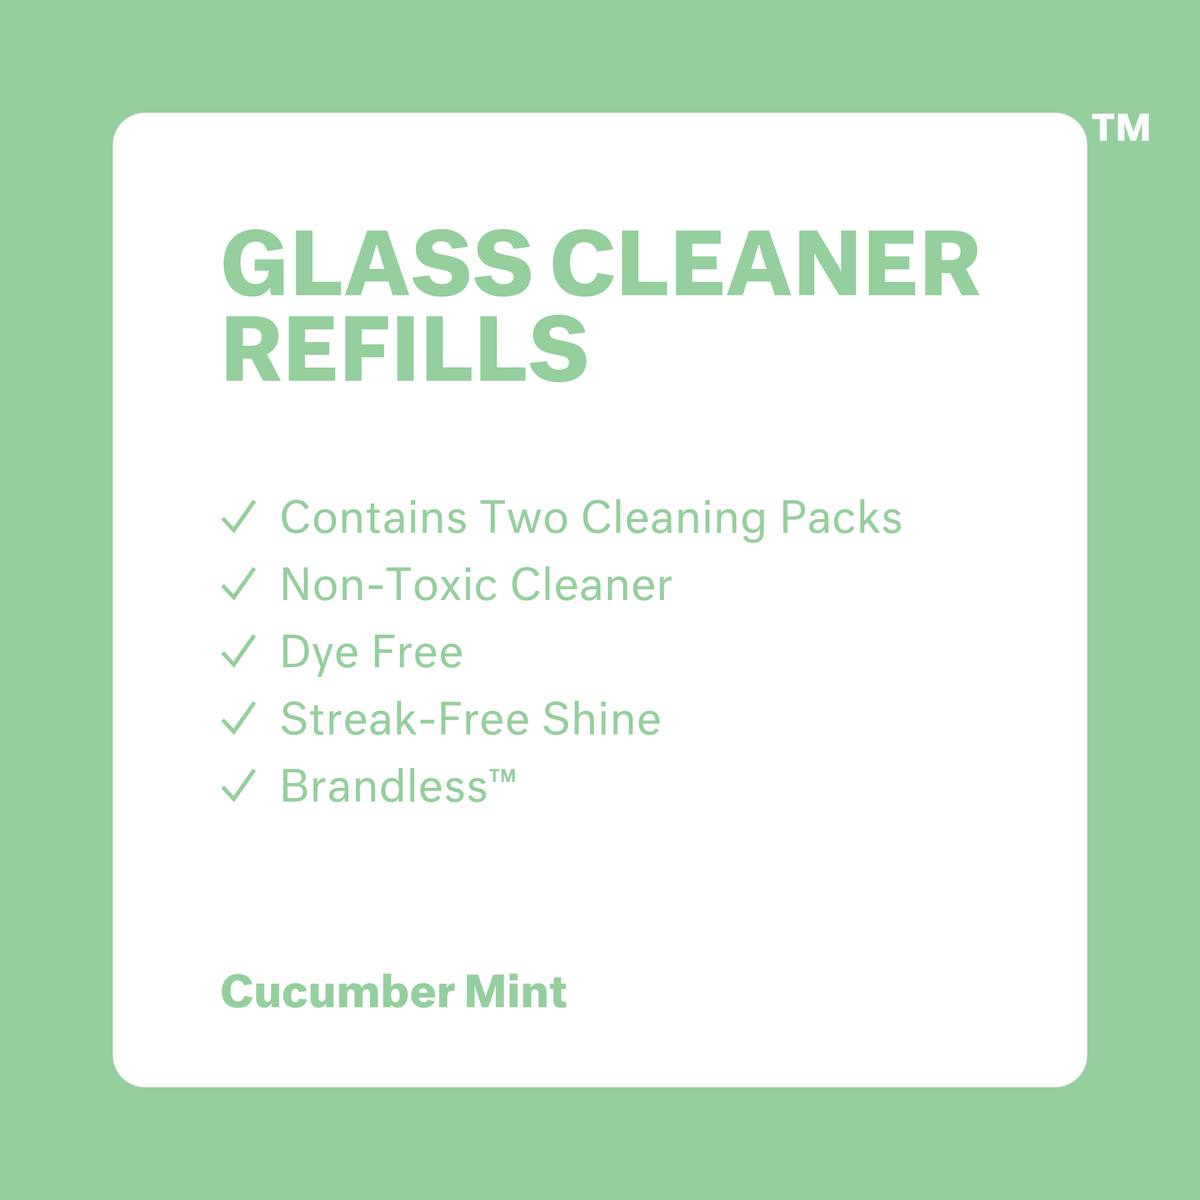 Glass Cleaner Refills, Cucumber Mint. Includes two cleaning packs. Non-toxic cleaners. Dye free. Streak-free shine. Brandless.